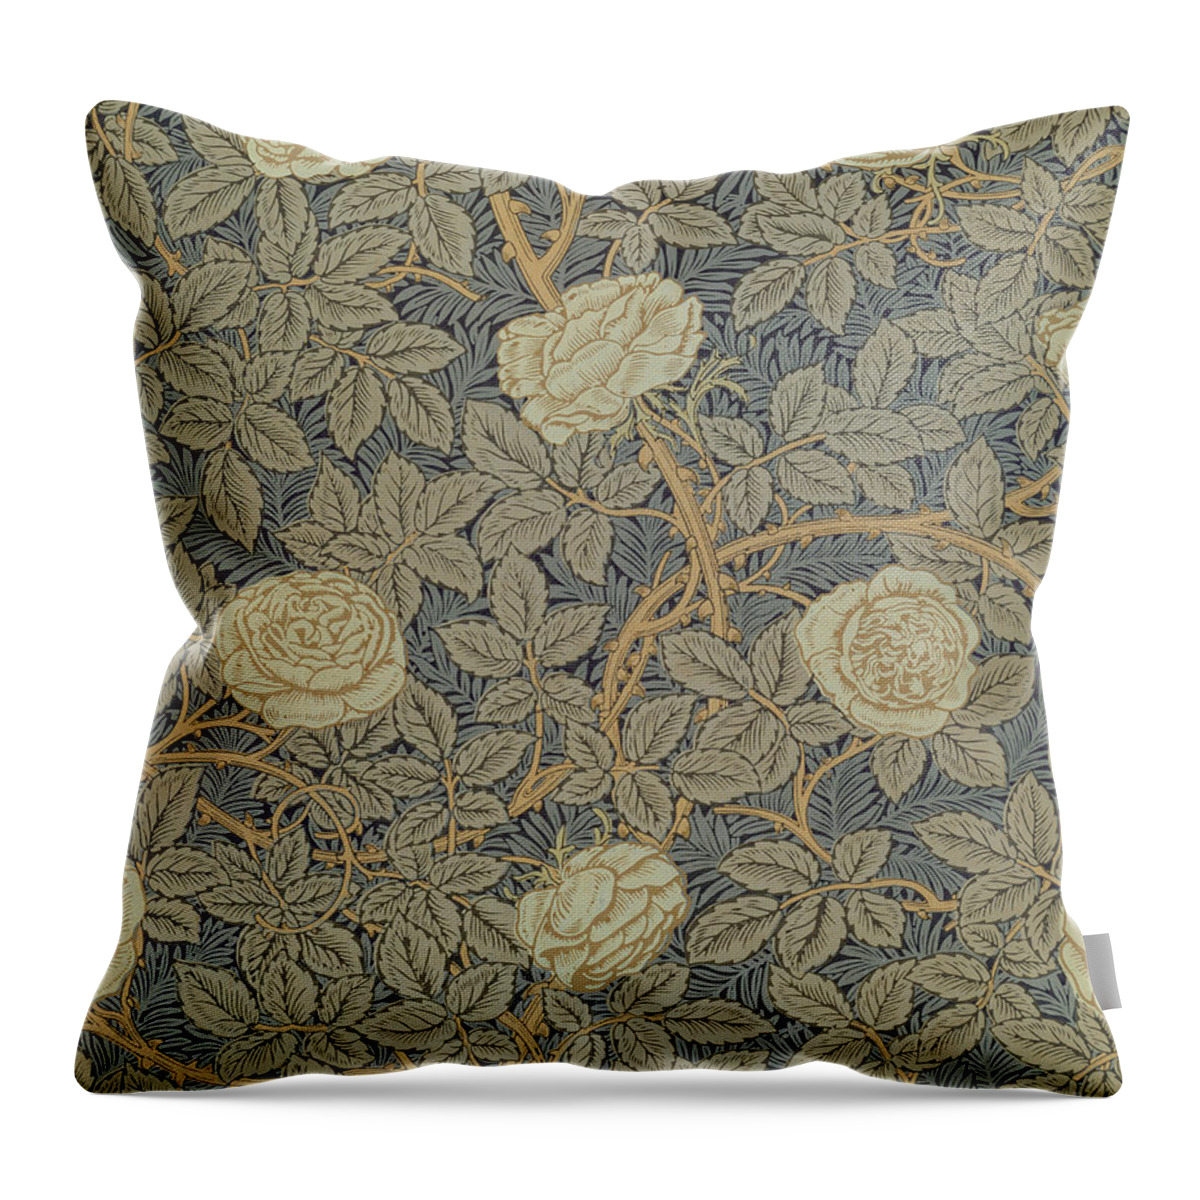 Arts Throw Pillow featuring the tapestry - textile Rose design by William Morris by William Morris